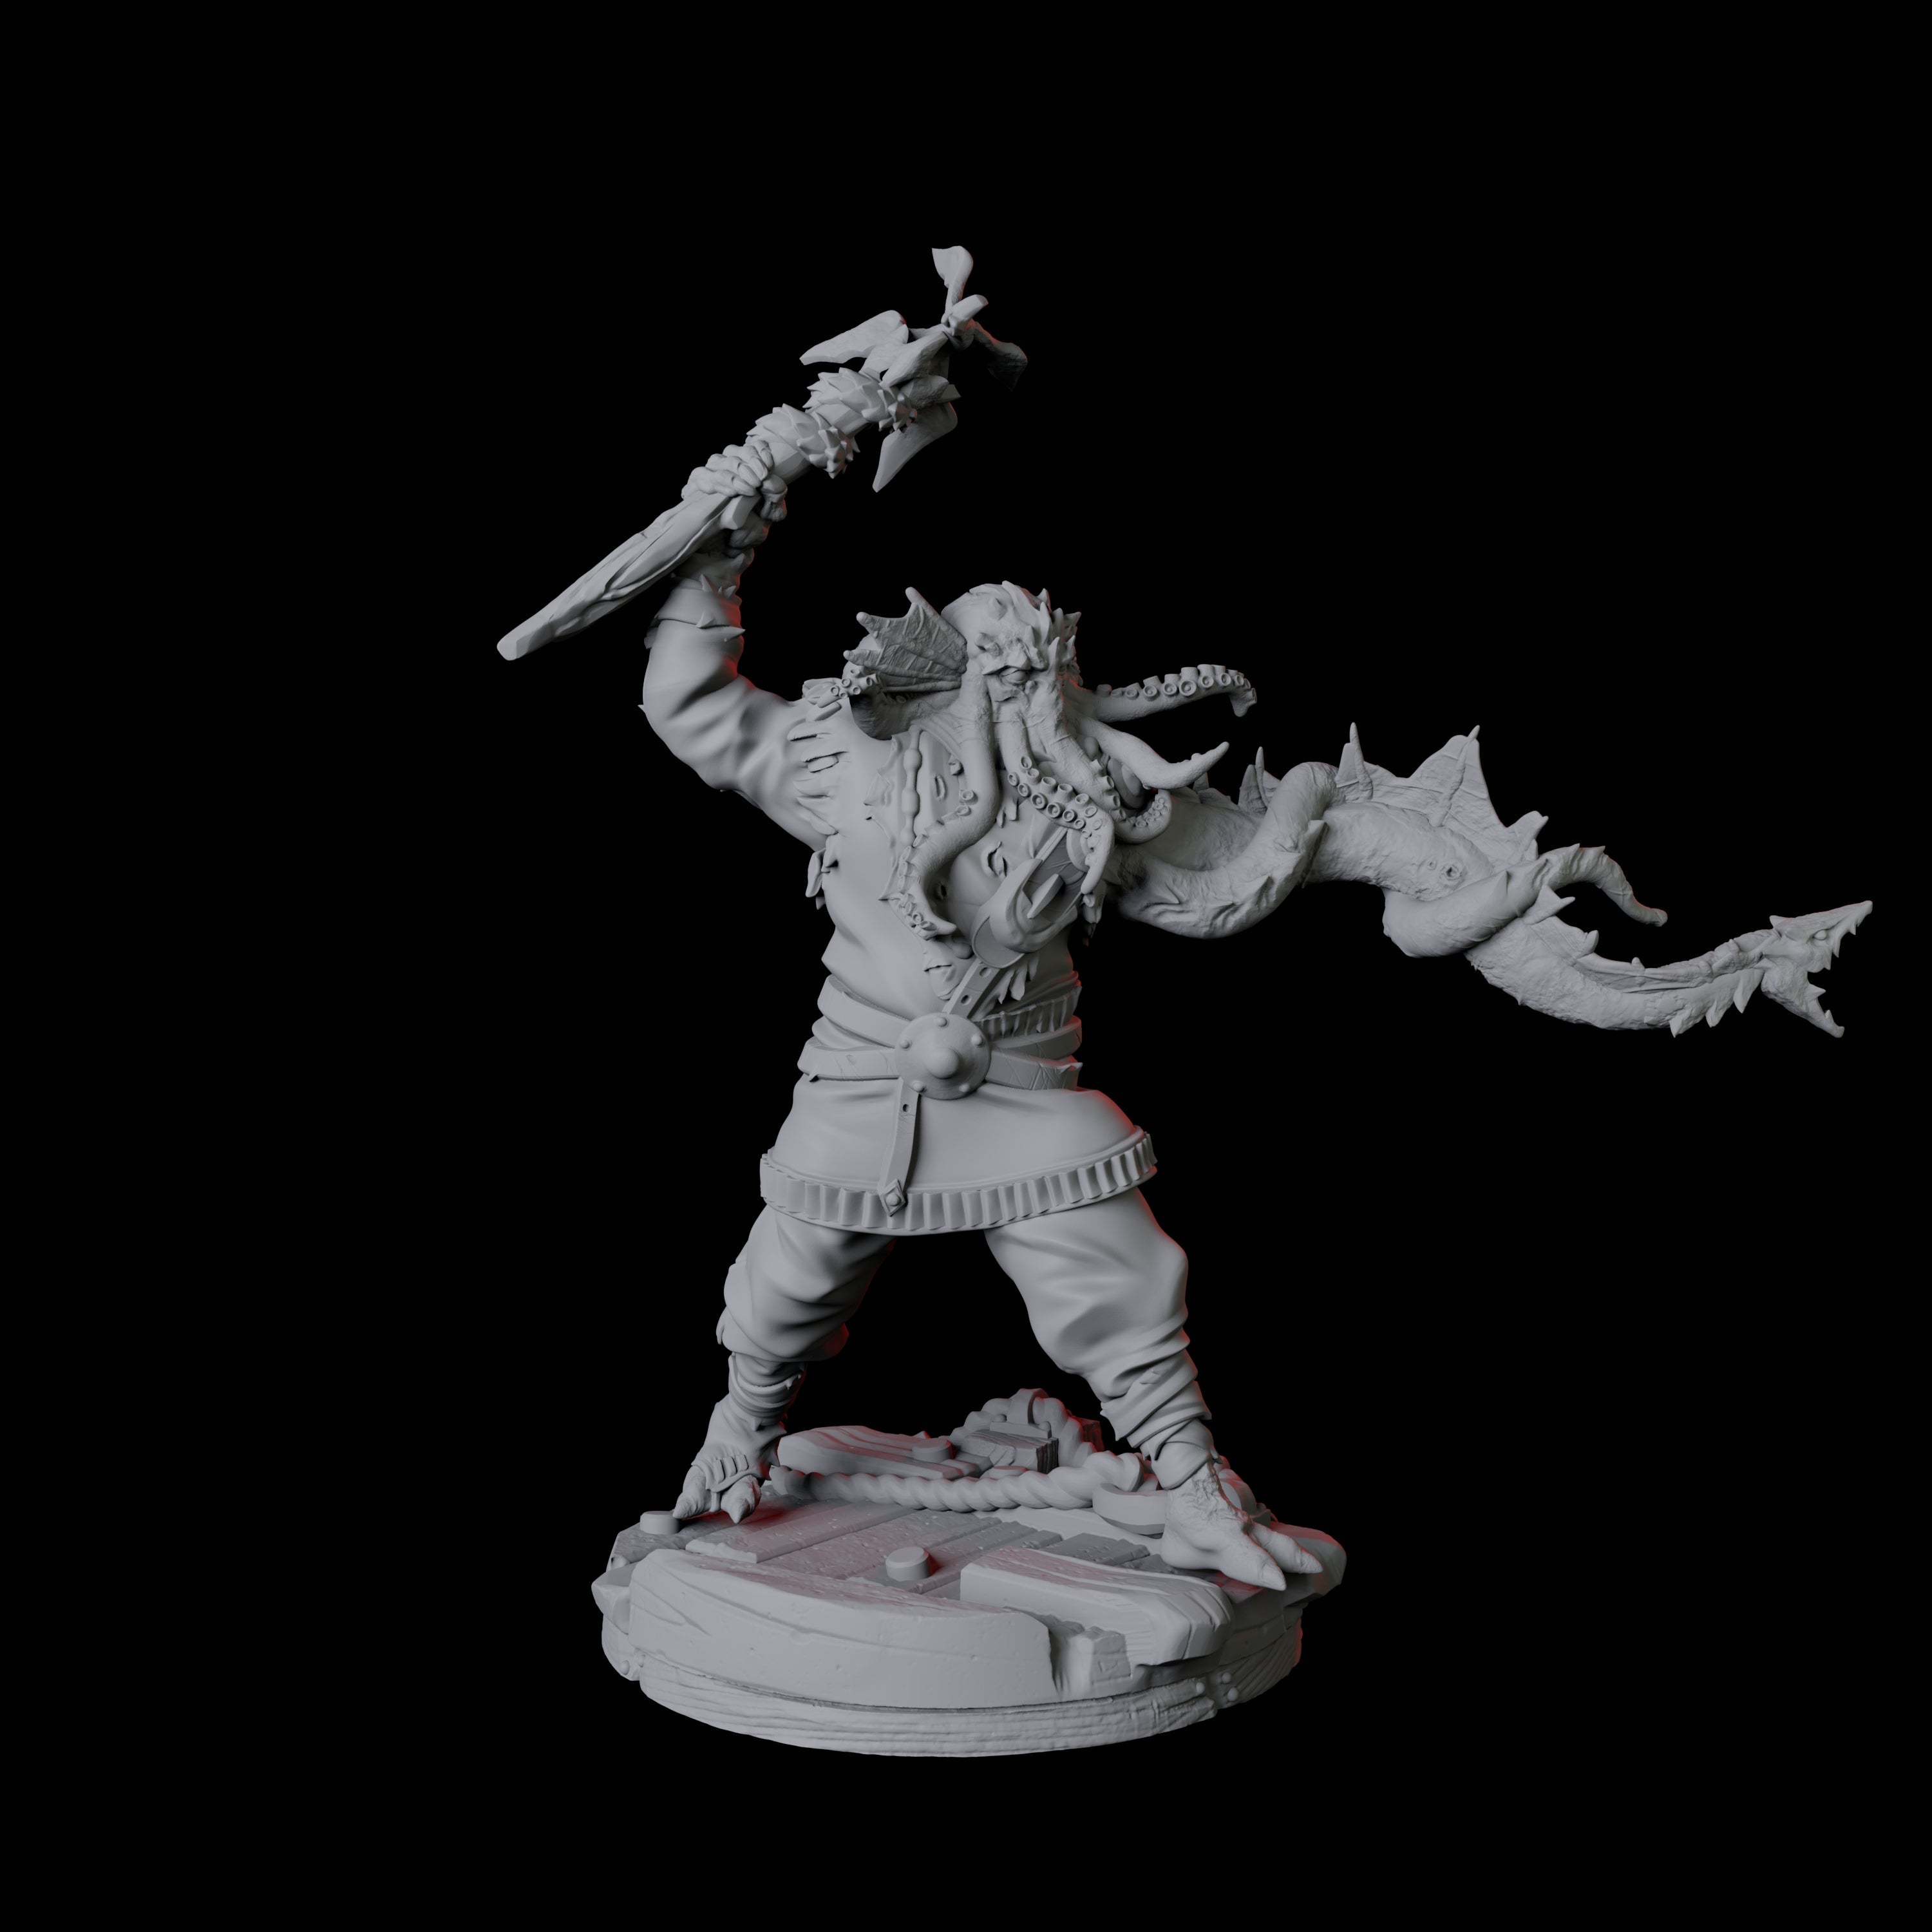 Sky Kraken Acolyte D Miniature for Dungeons and Dragons, Pathfinder or other TTRPGs